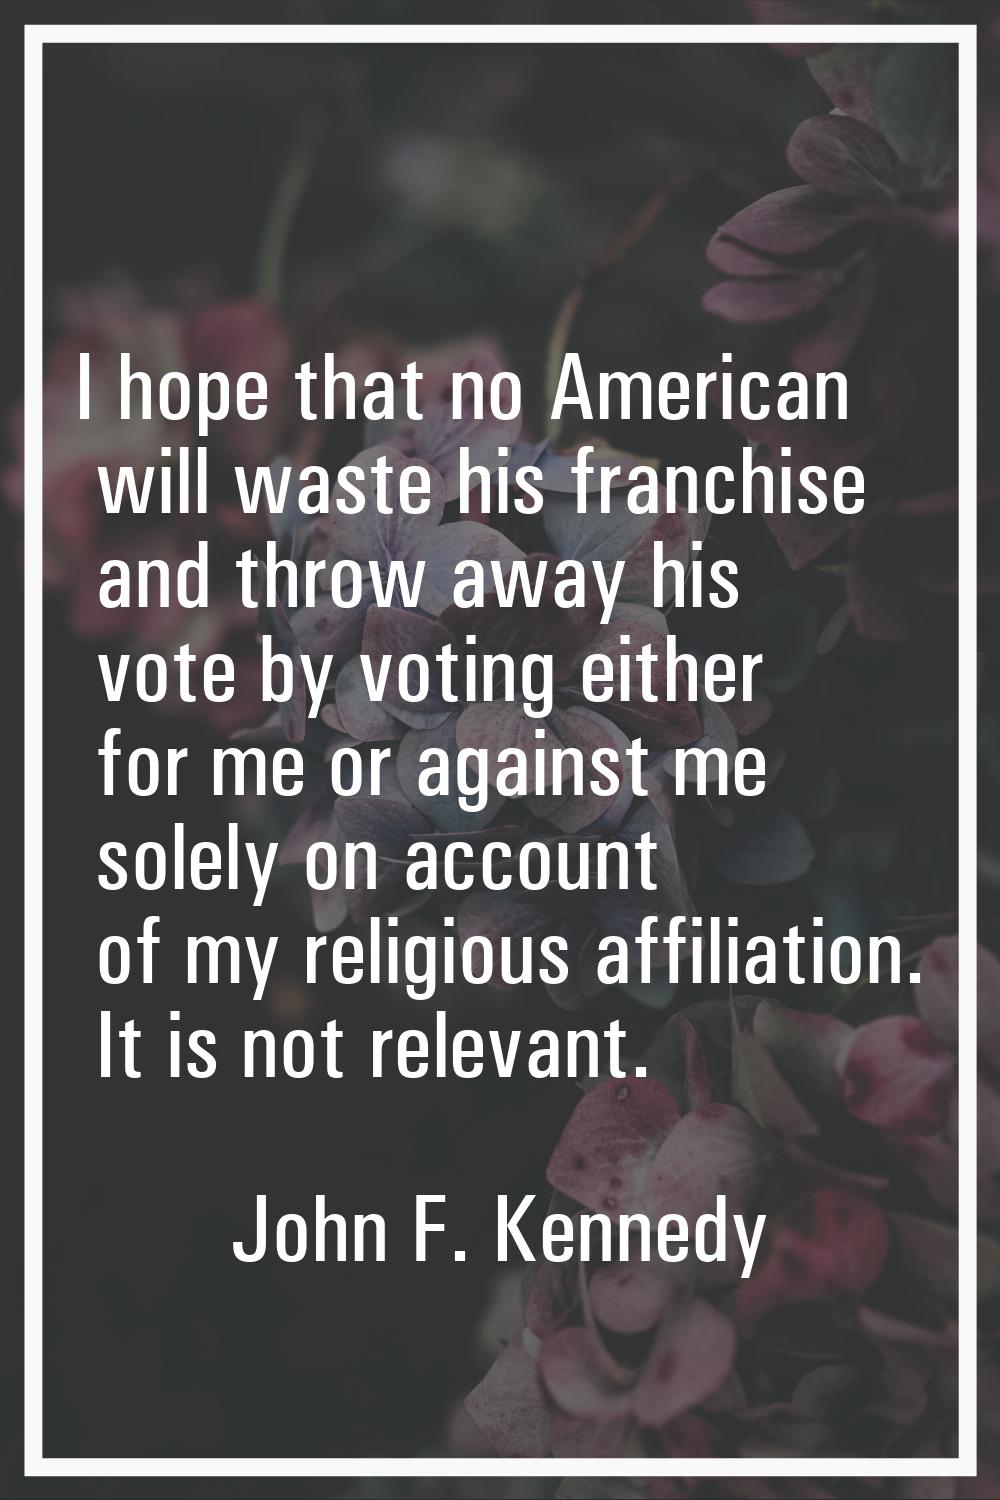 I hope that no American will waste his franchise and throw away his vote by voting either for me or